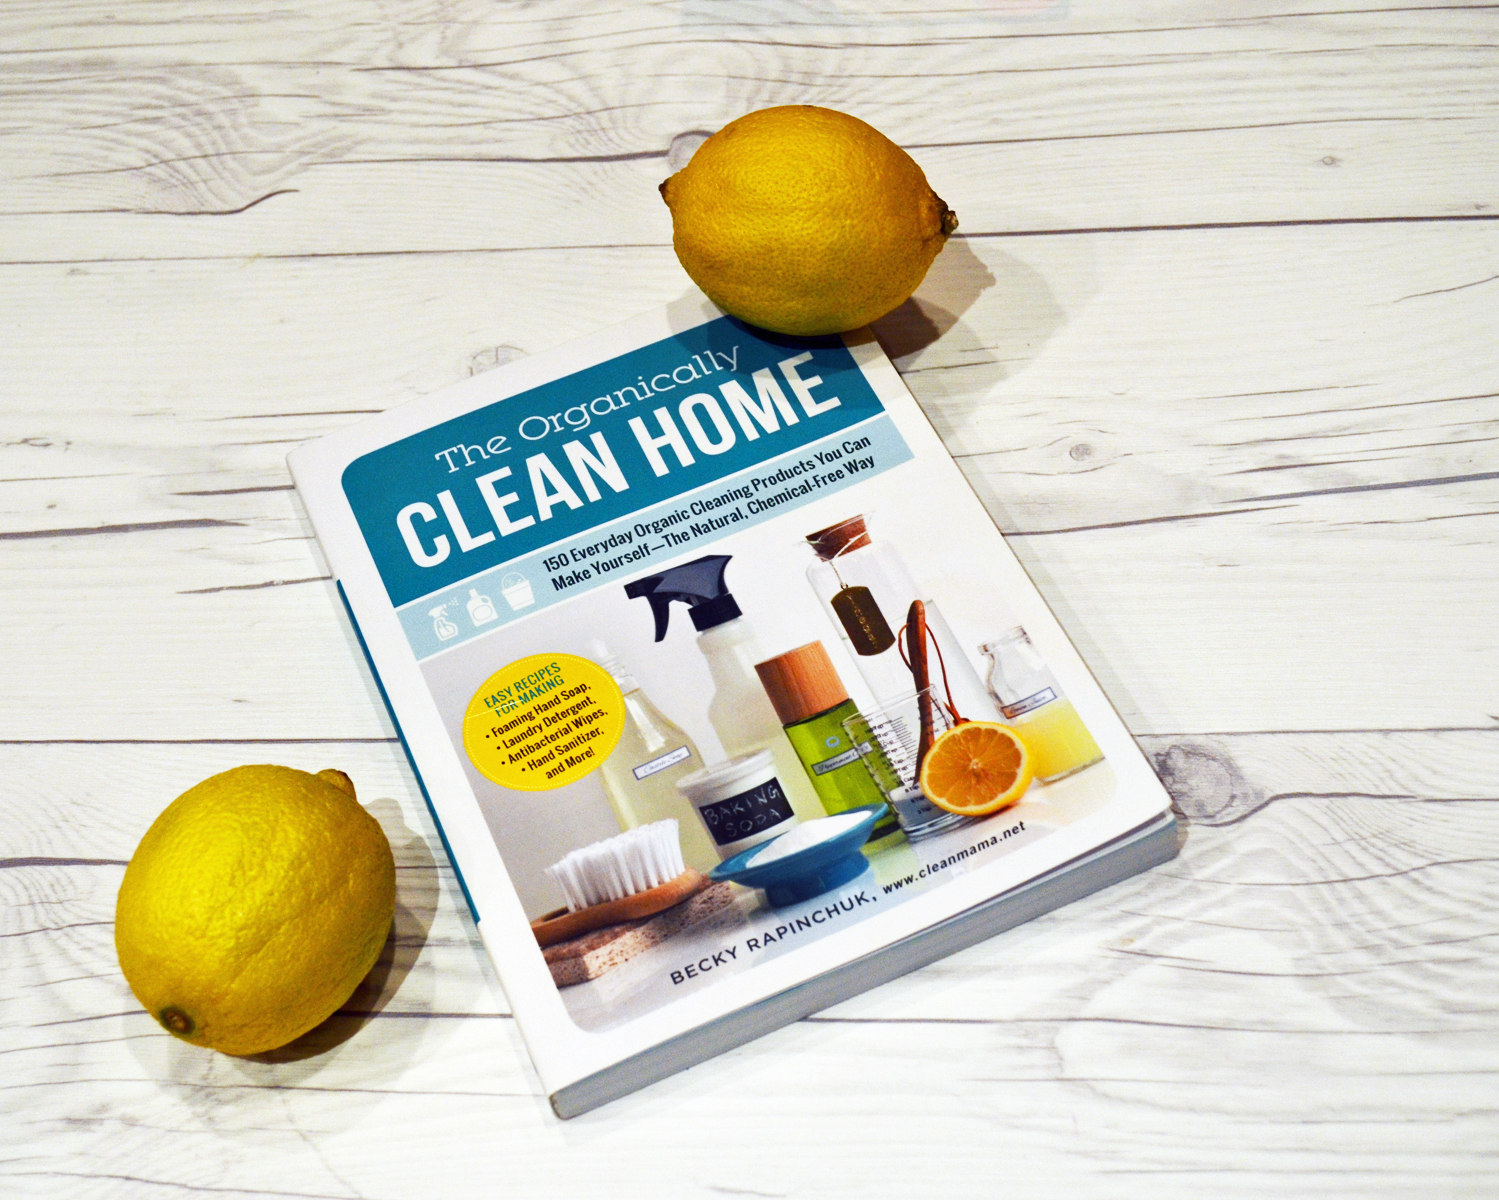 The Organically Clean Home by the clean mama's Becky Rapinchuk